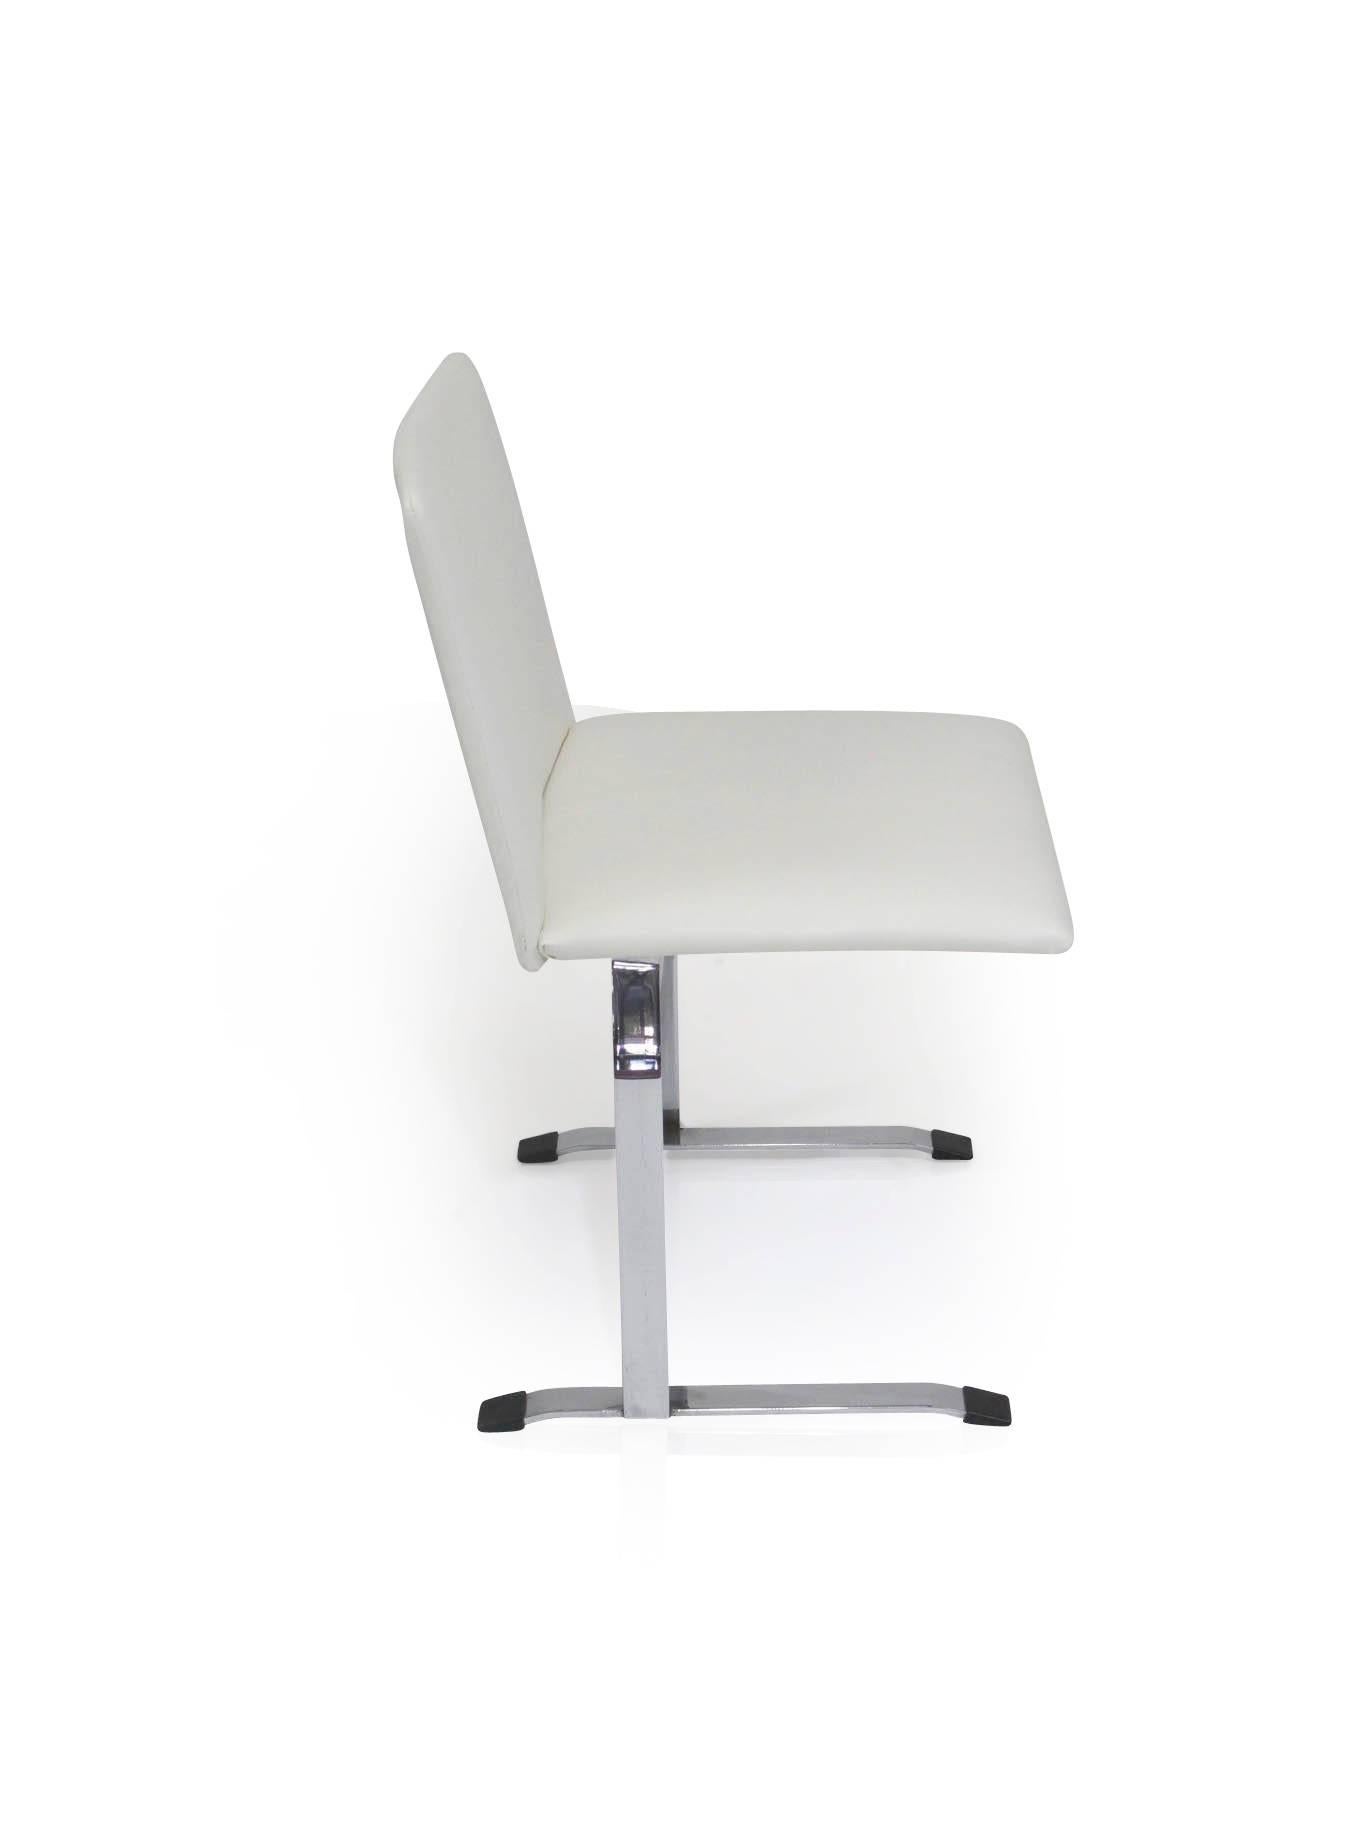 Italian Giovanni Offredi for Saporiti Dining Chairs in White Vinyl on Chrome Steel Frame